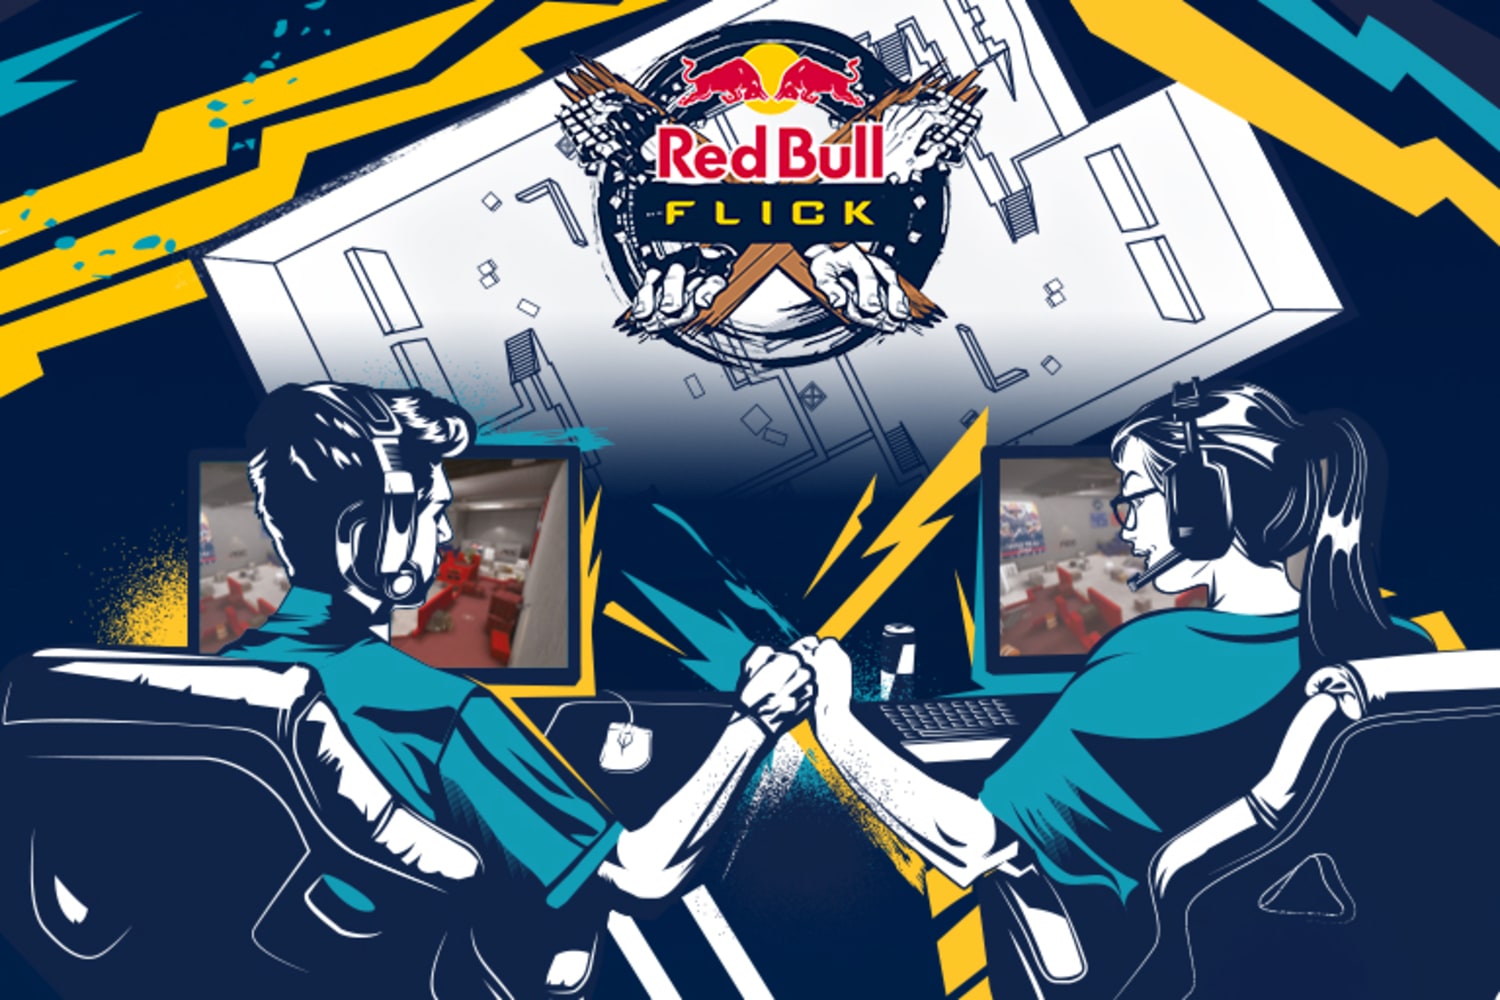 What S Red Bull Flick - capture the flag blue team red team roblox